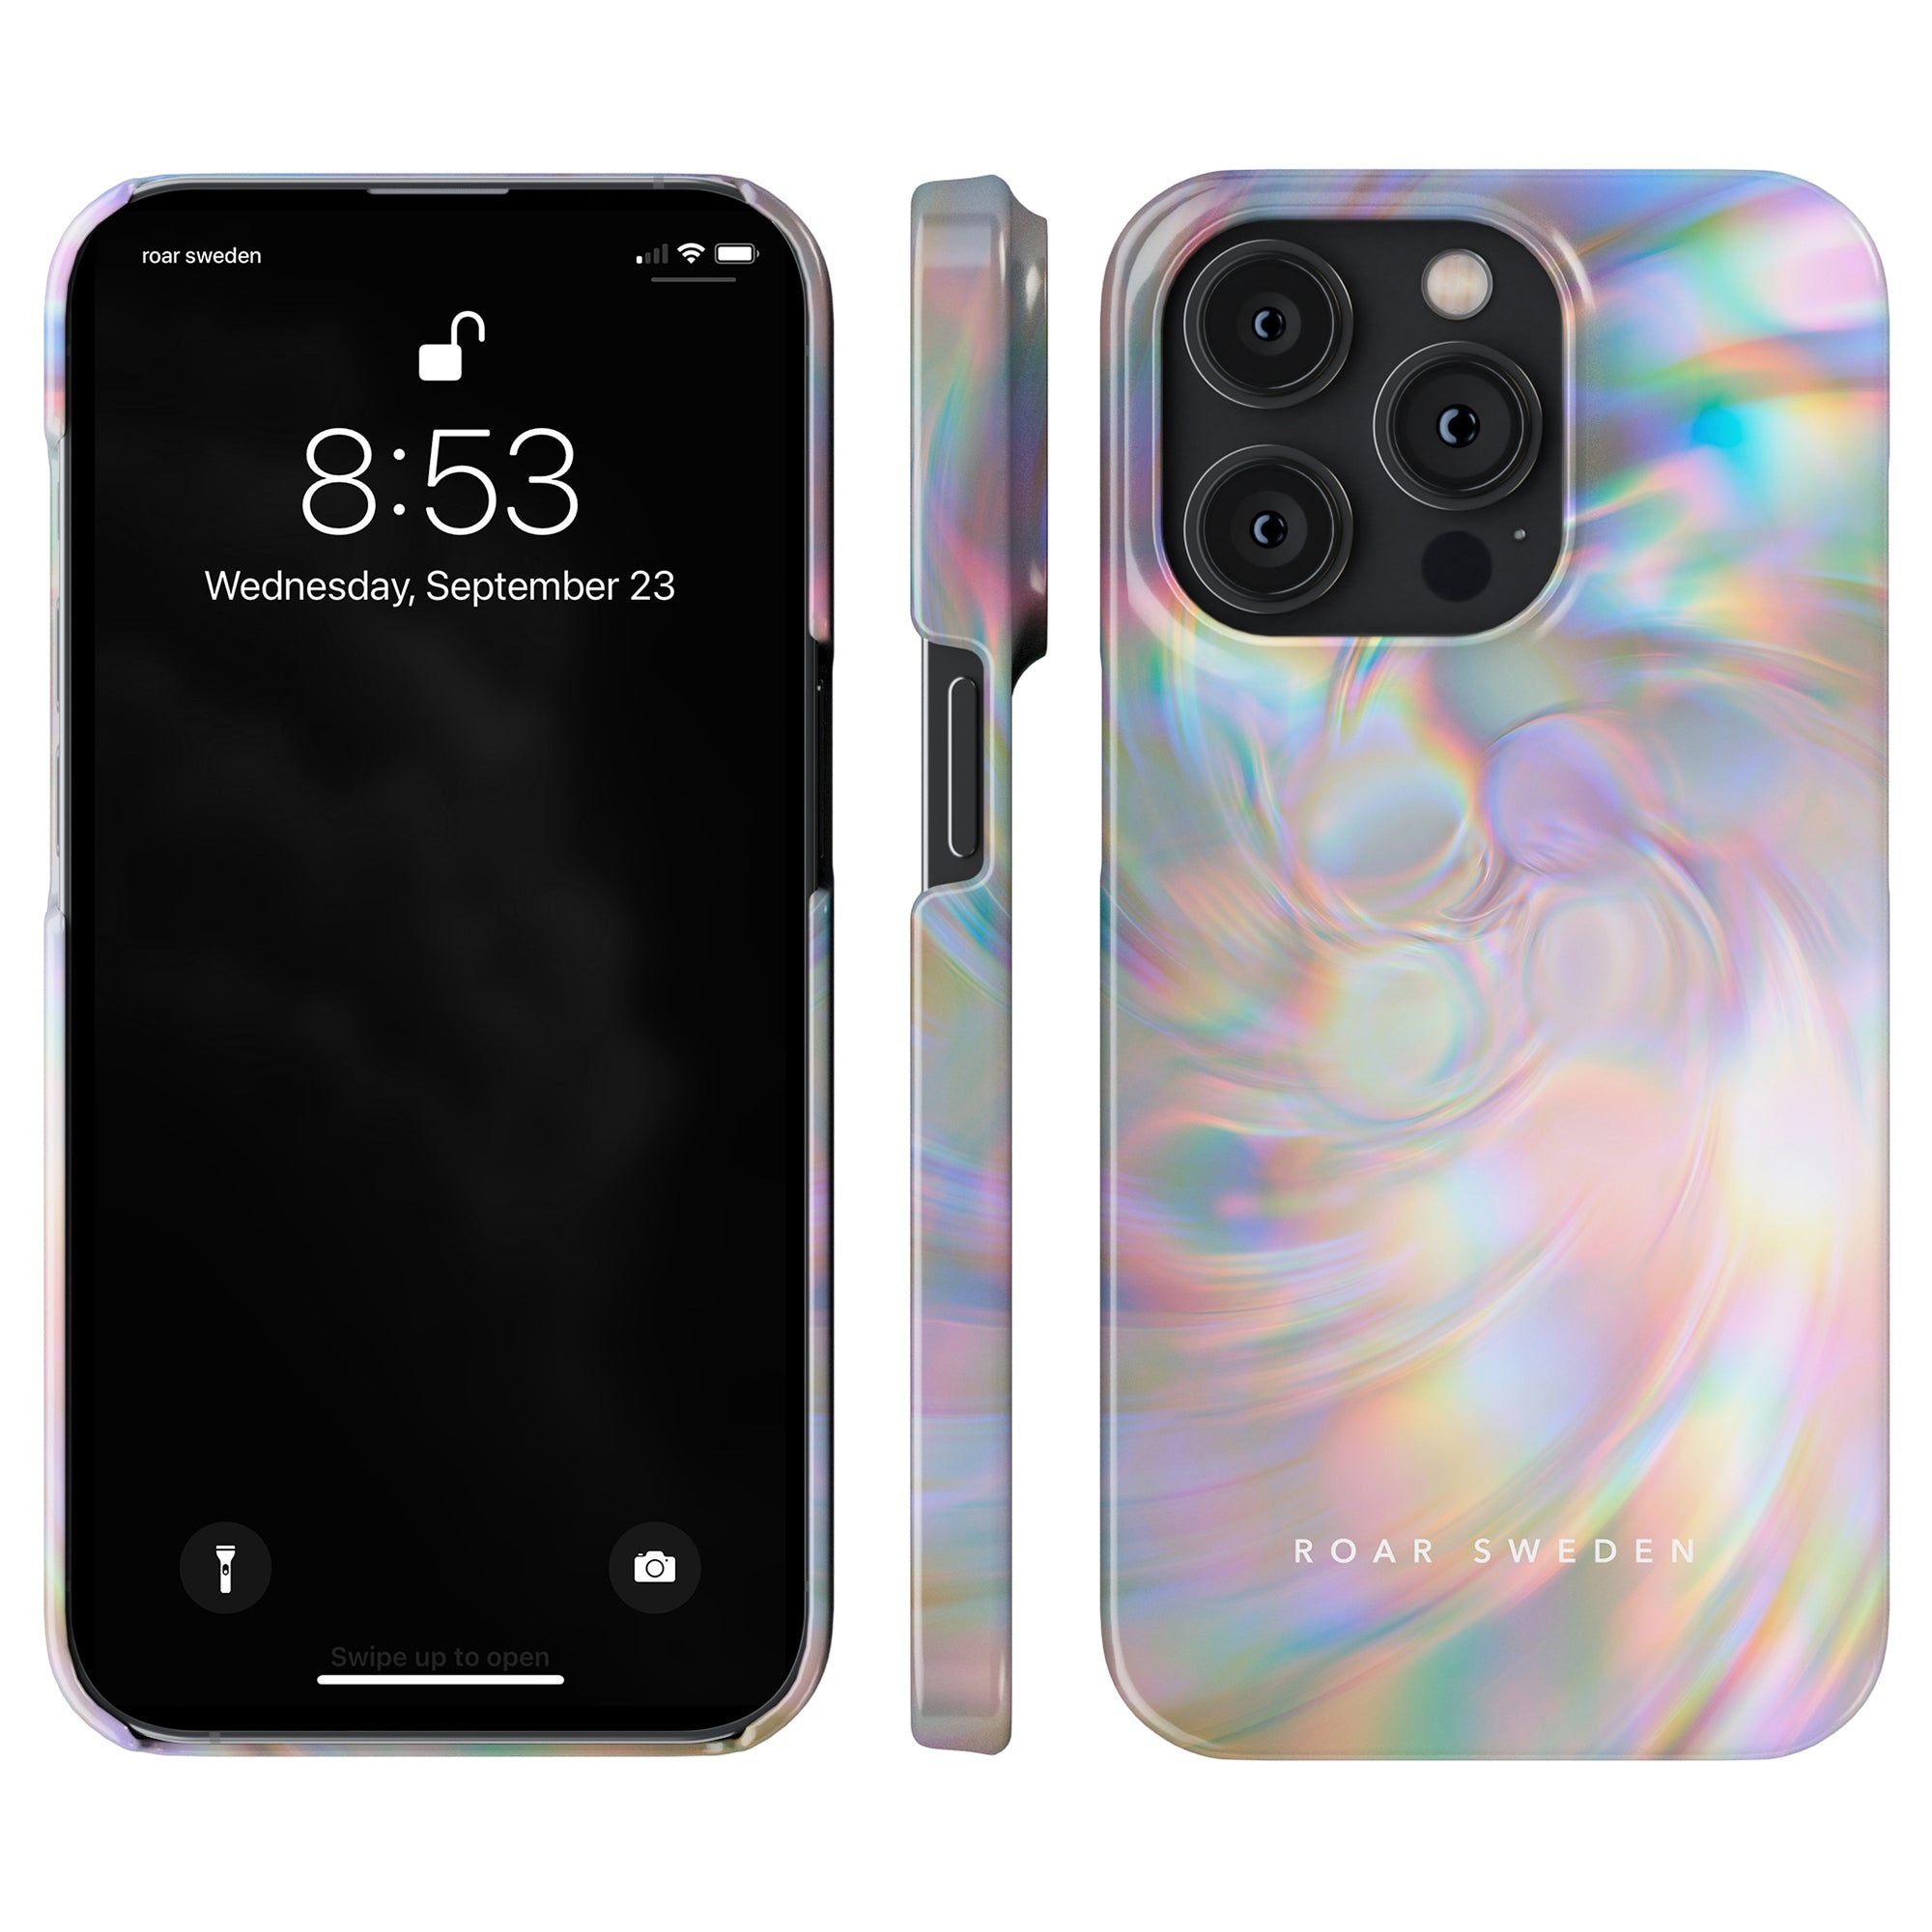 Black smartphone with screen showing time and date, beside a Pearlescent Slim case with iridescent swirl design.